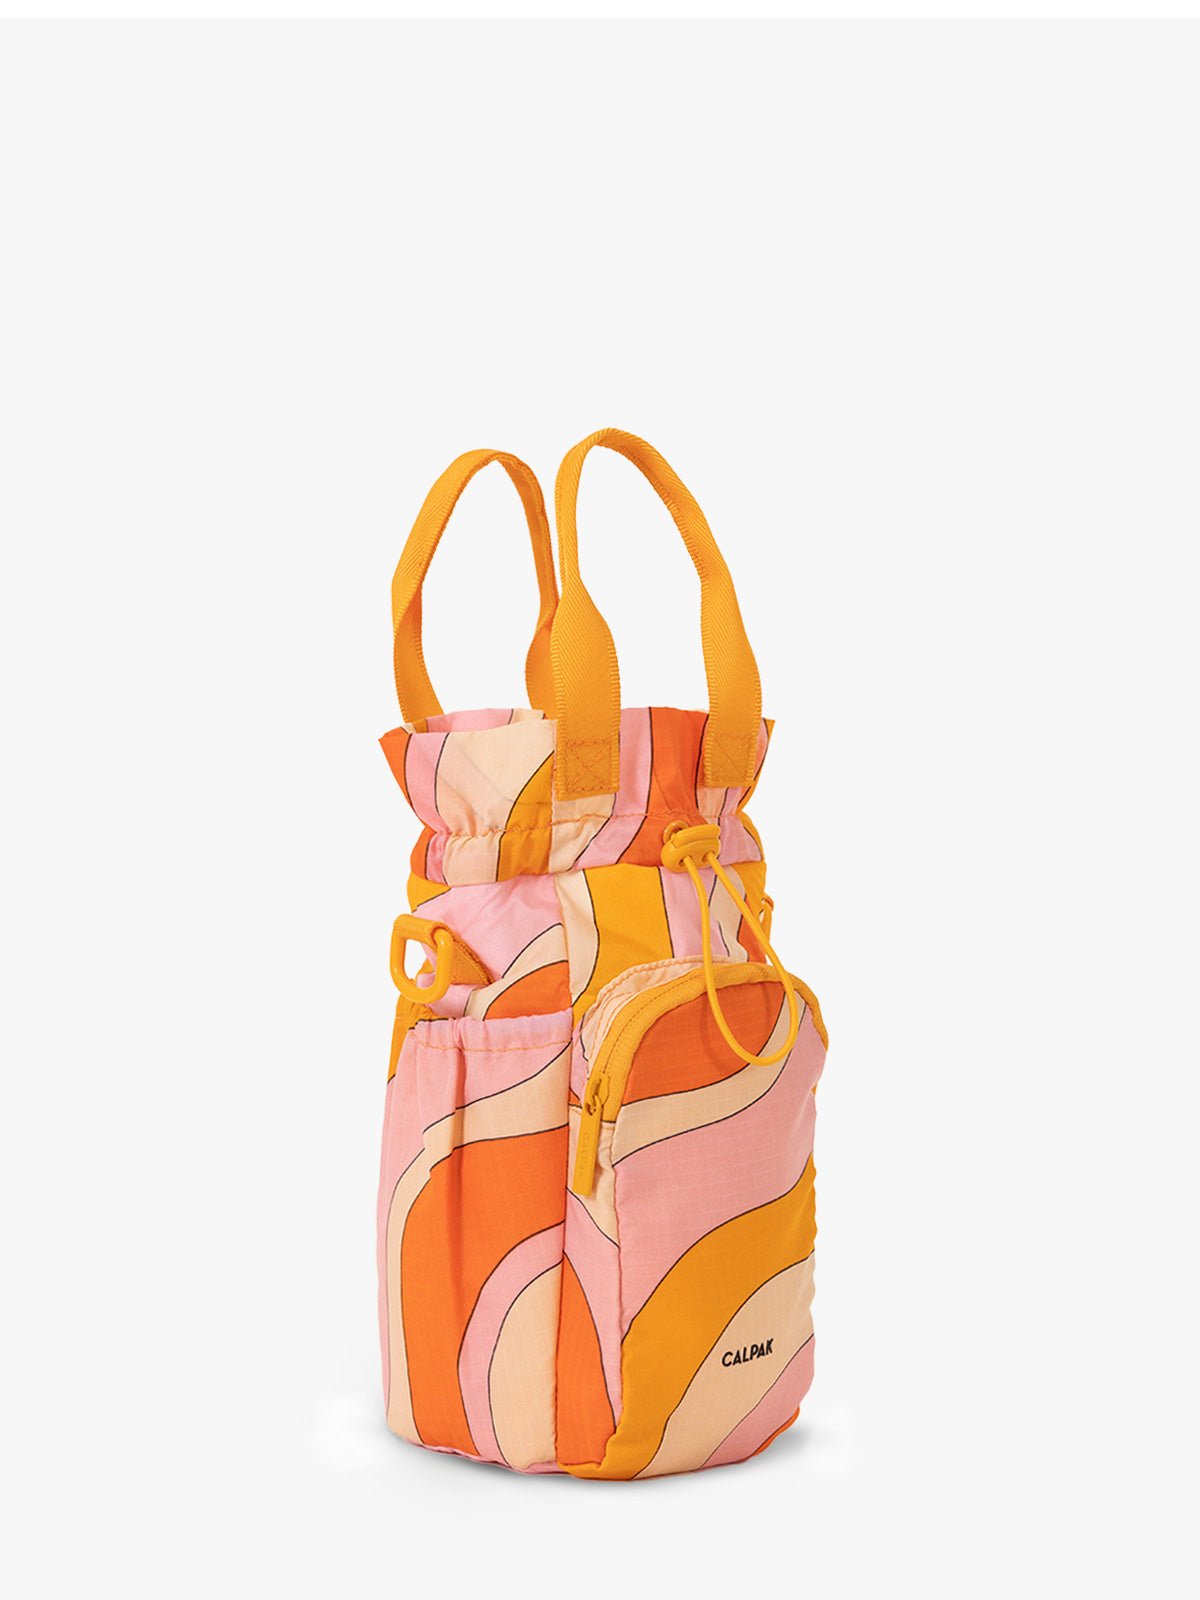 CALPAK Water Bottle Holder purse with zipped pocket for phone in retro sunset